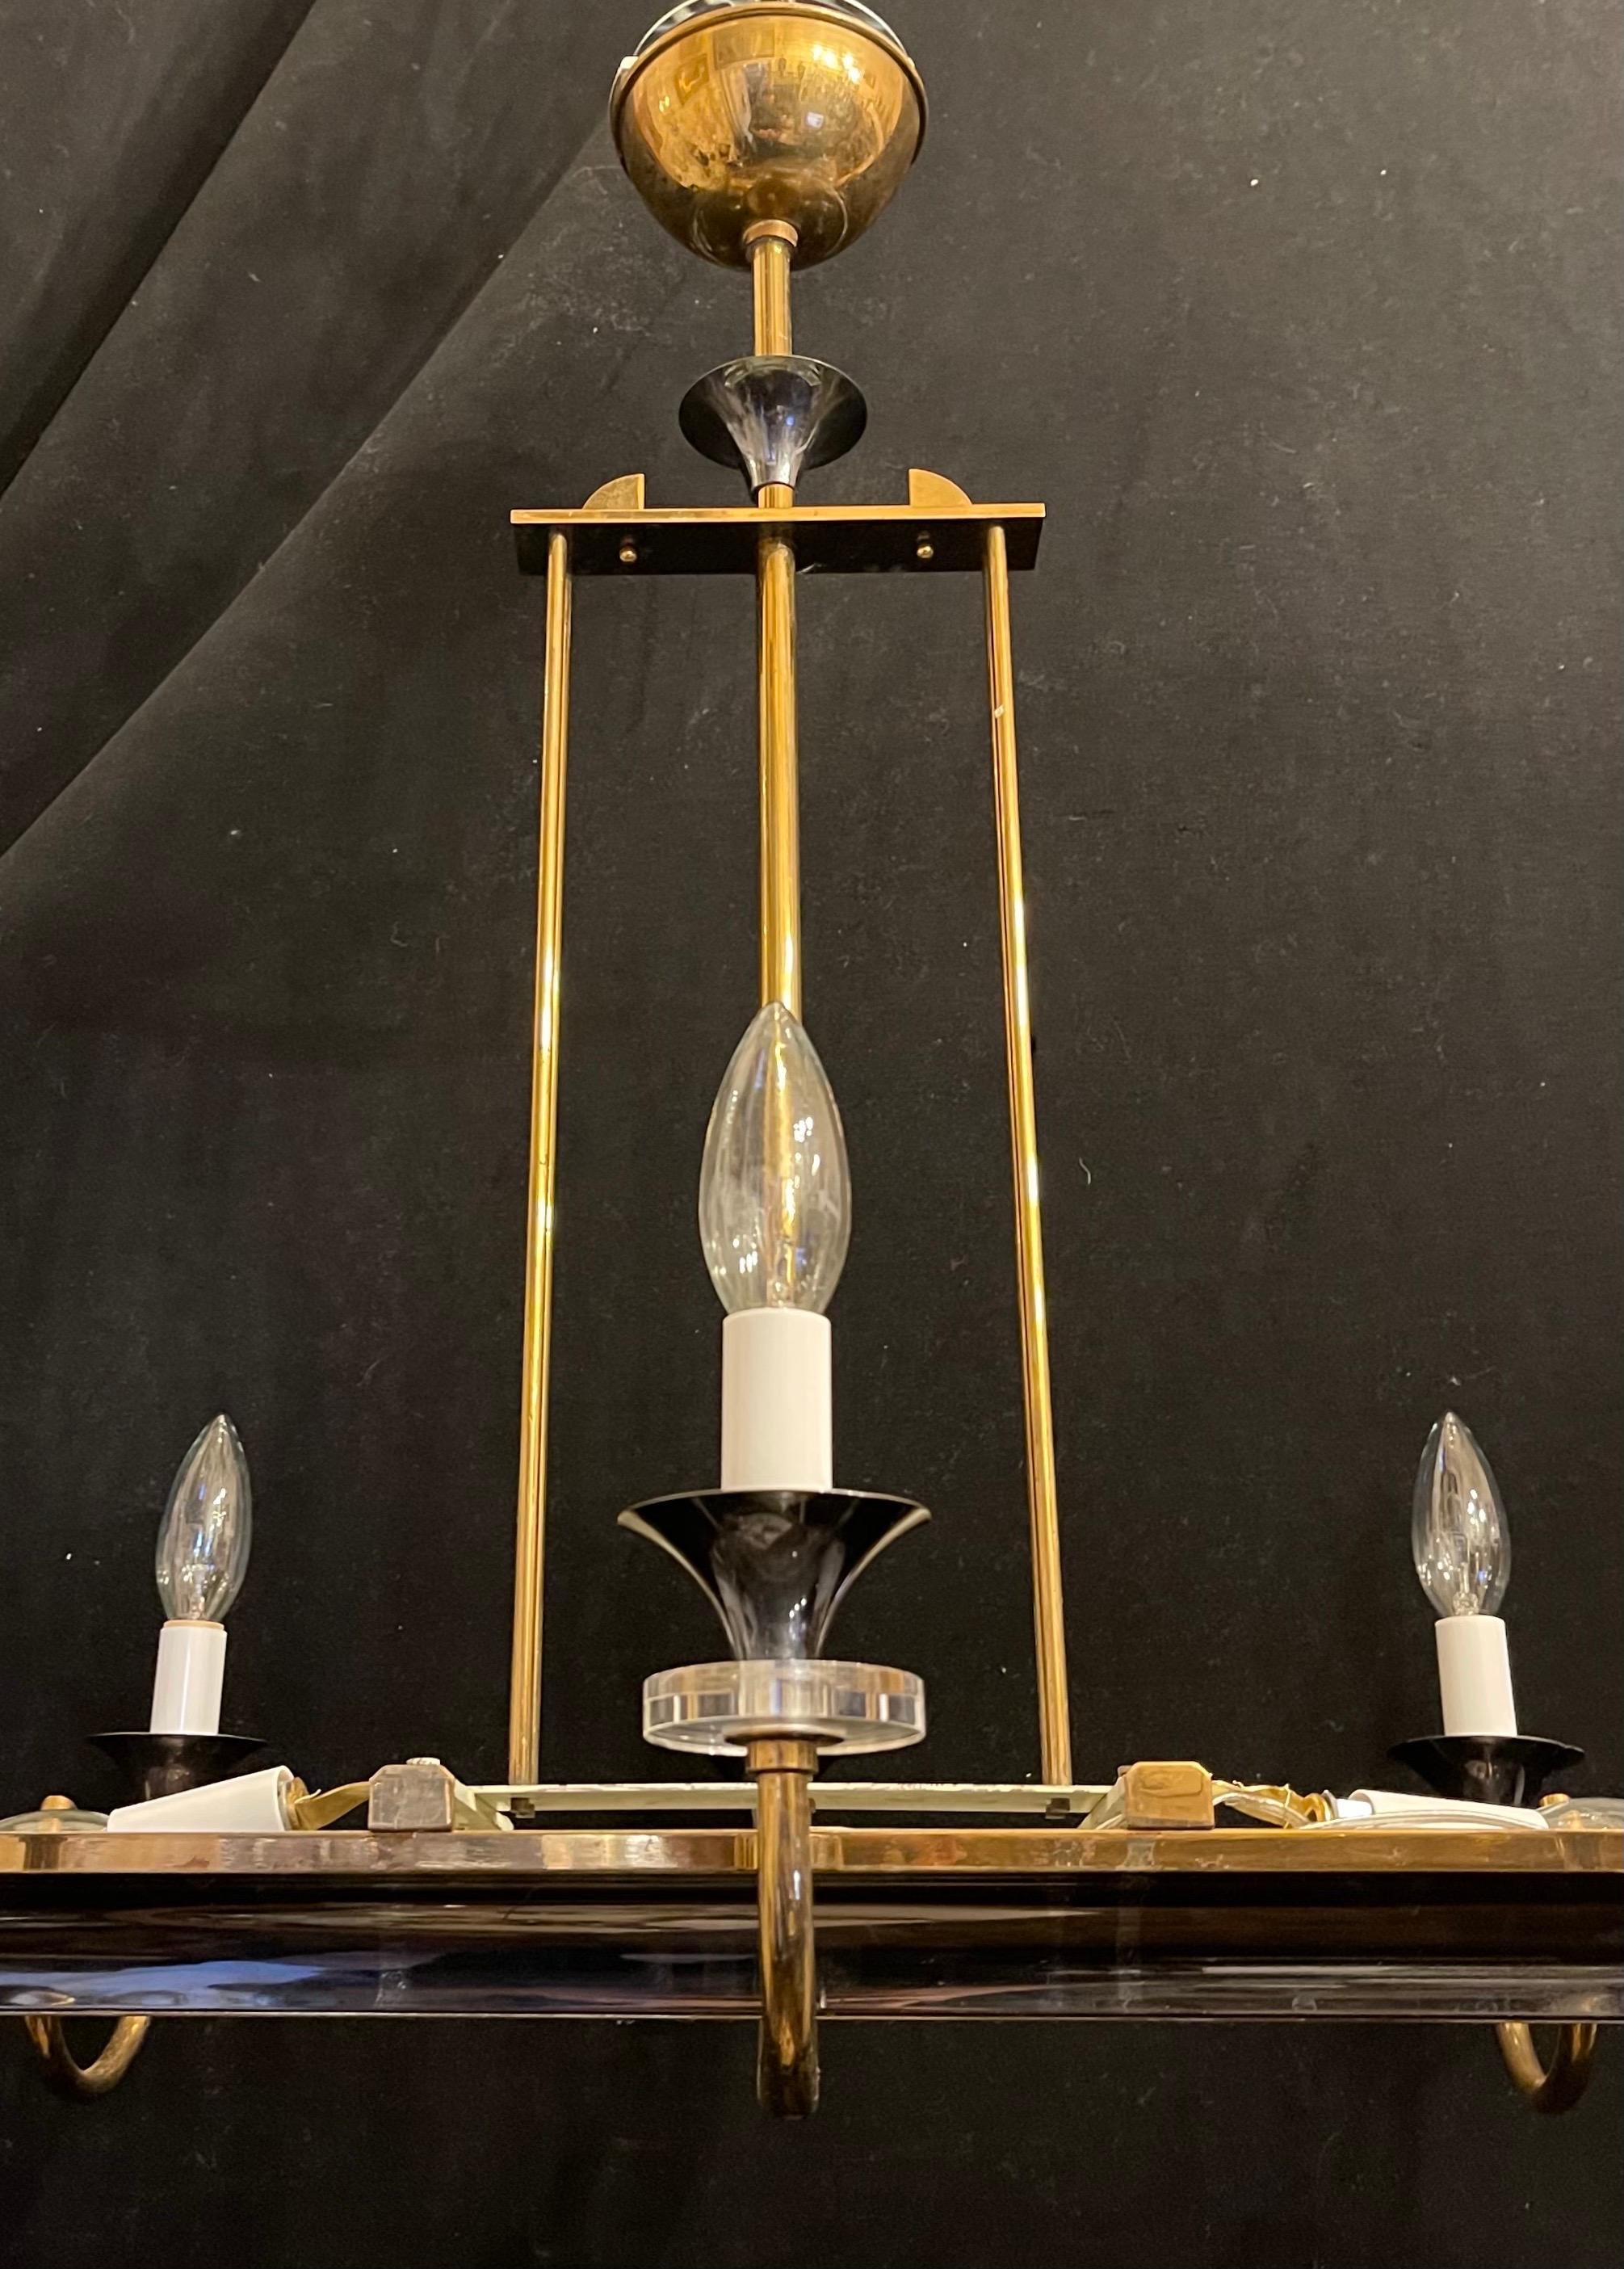 A wonderful French Art Deco / Mid-Century Modern bronze / brass patina with reeded glass panel 8 arm chandelier with 2 interior lights, this fixture has been completely rewired with new sockets.